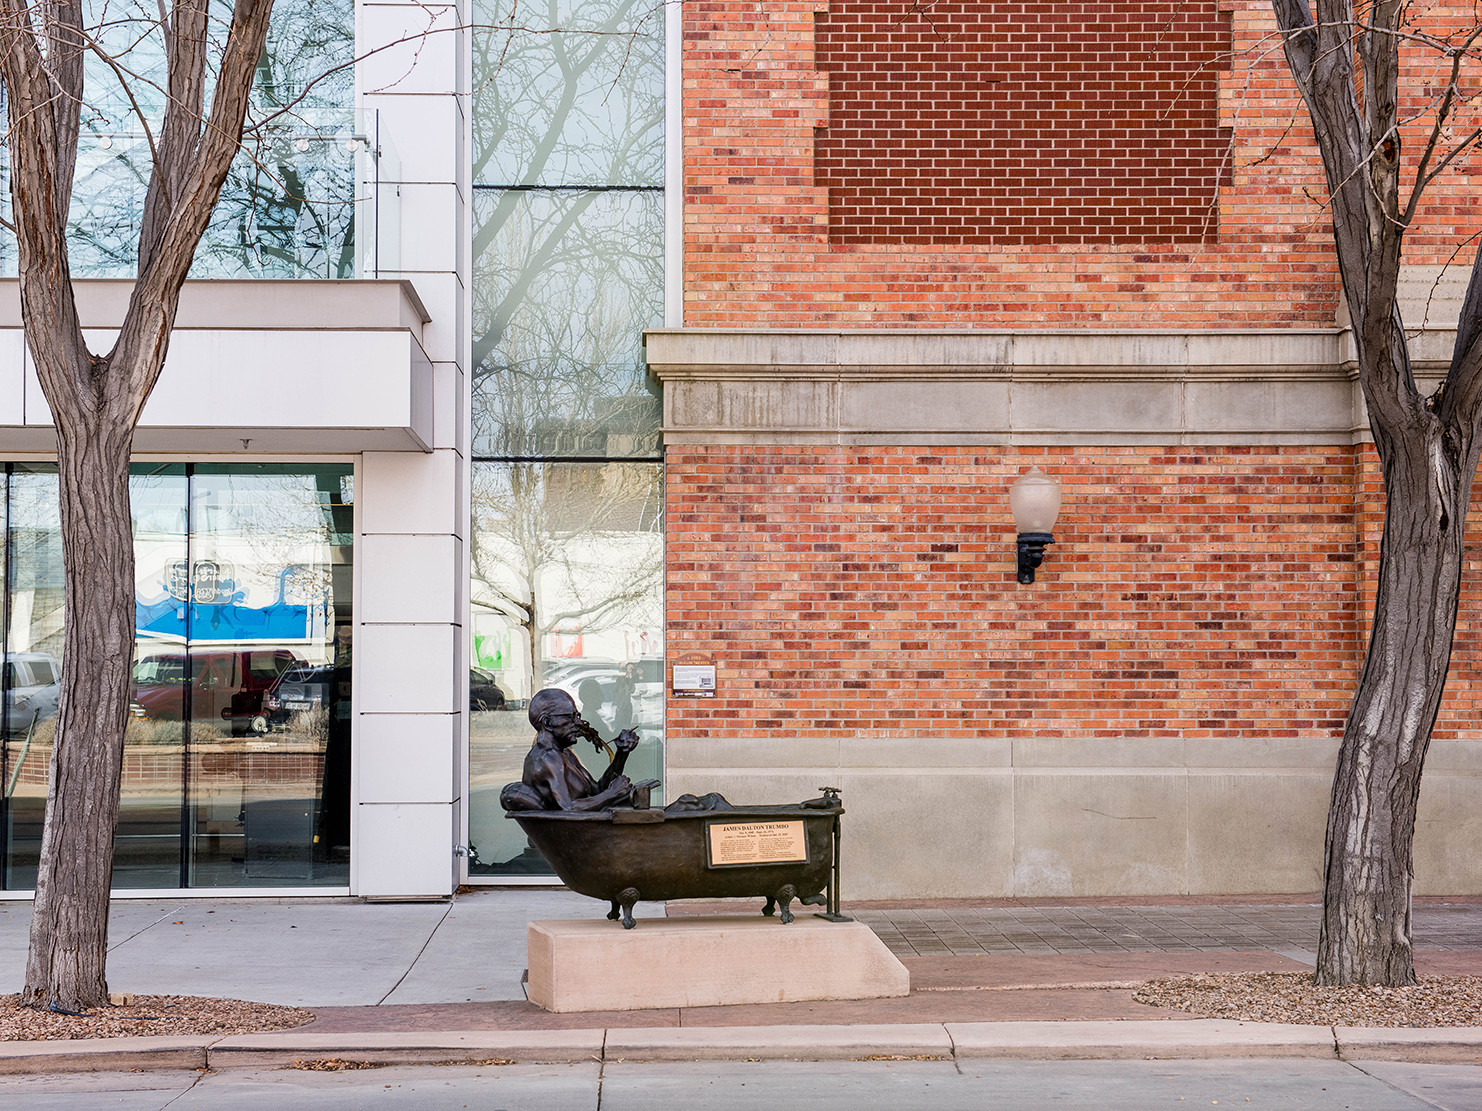 bronze sculpture of a man in a bathtub on a plinth on the sidewalk's edge between two trees in front of glass, steel, brick